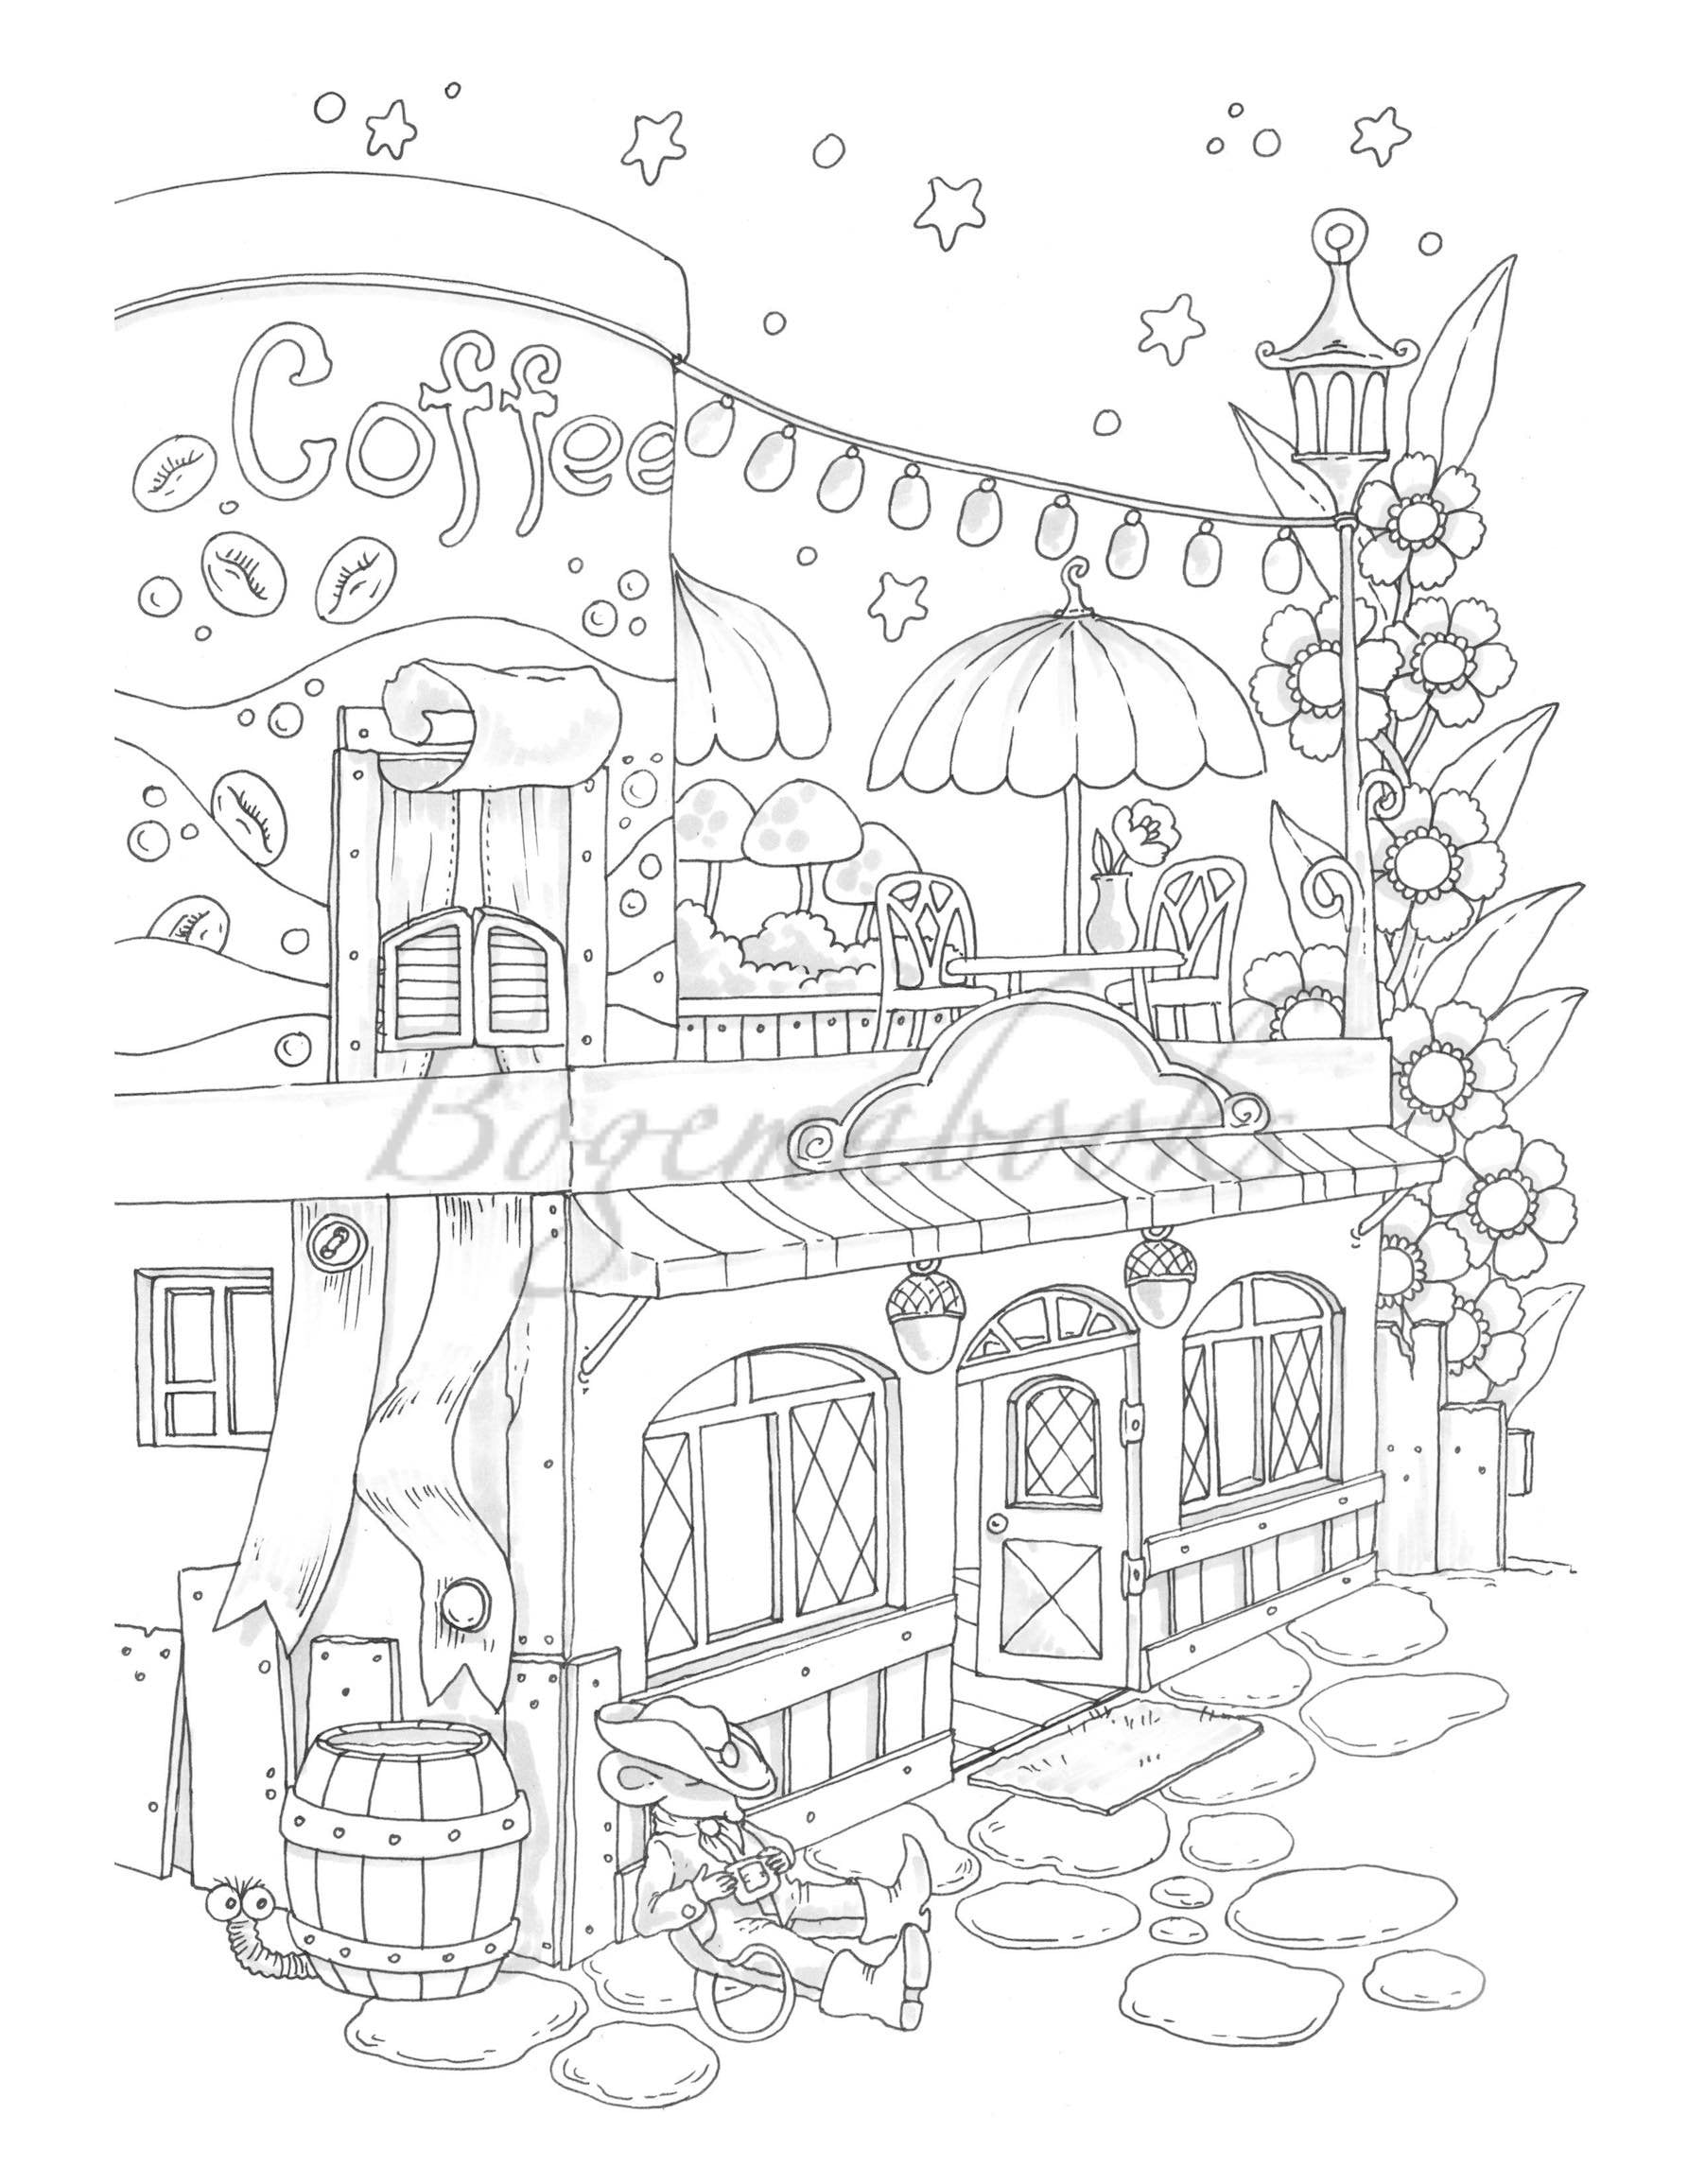 Nice Little Town 4 adult Coloring Book, Digital, Coloring Pages PDF,  Coloring Pages Printable, for Stress Relieving, for Relaxation 